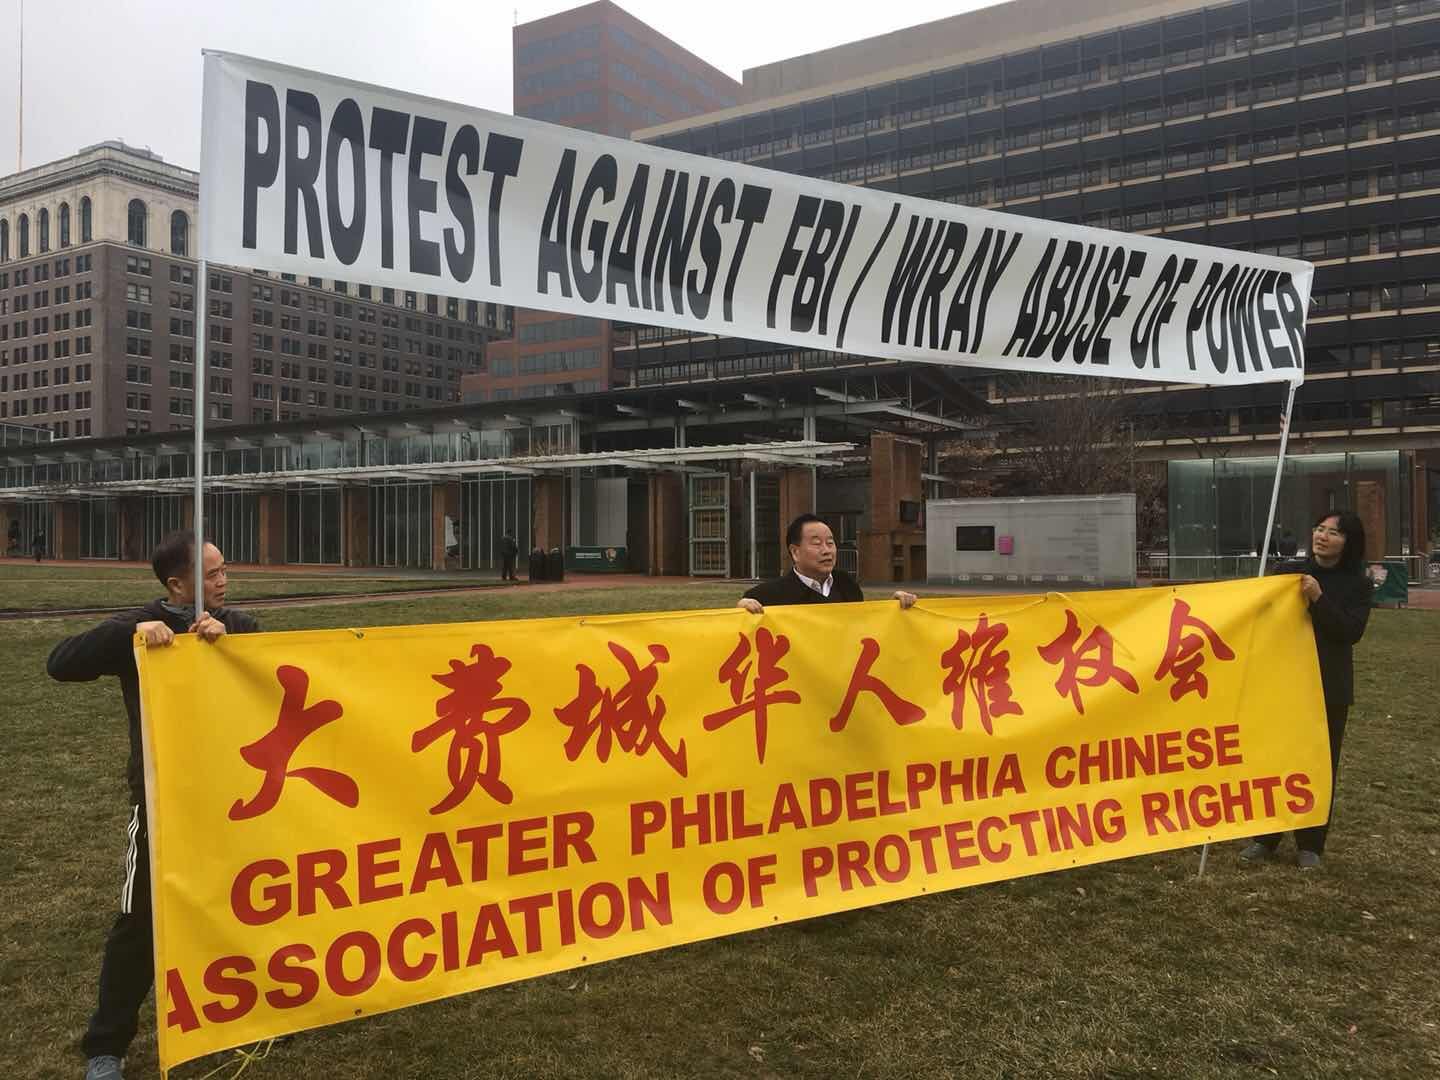 Speech by Prof. Xi, XiaoXing at the 2/20 Rally protest against FBI  Director Christopher Wary